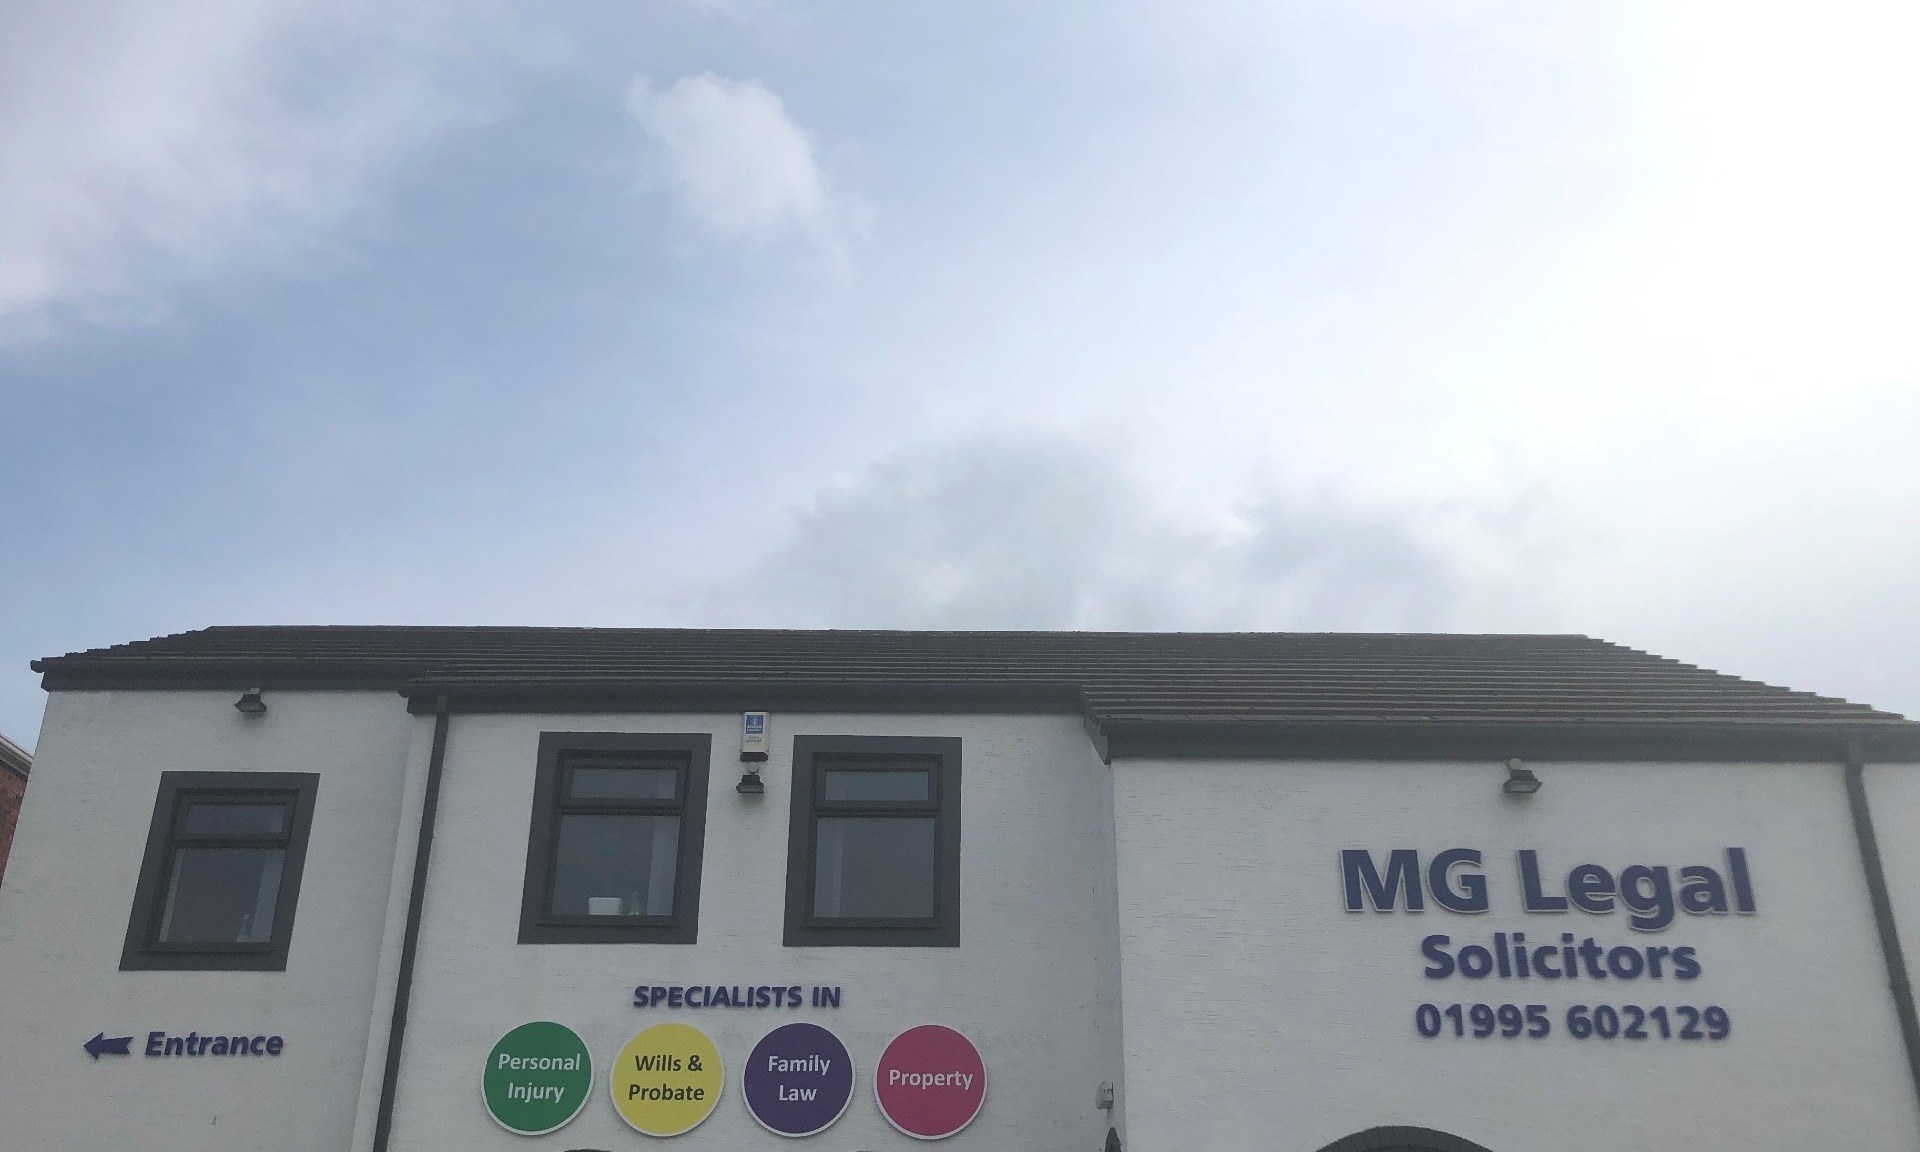 MG Legal's Garstang office with the four different coloured ball signs, an entrance sign and MG Legal Solicitors 01995602129